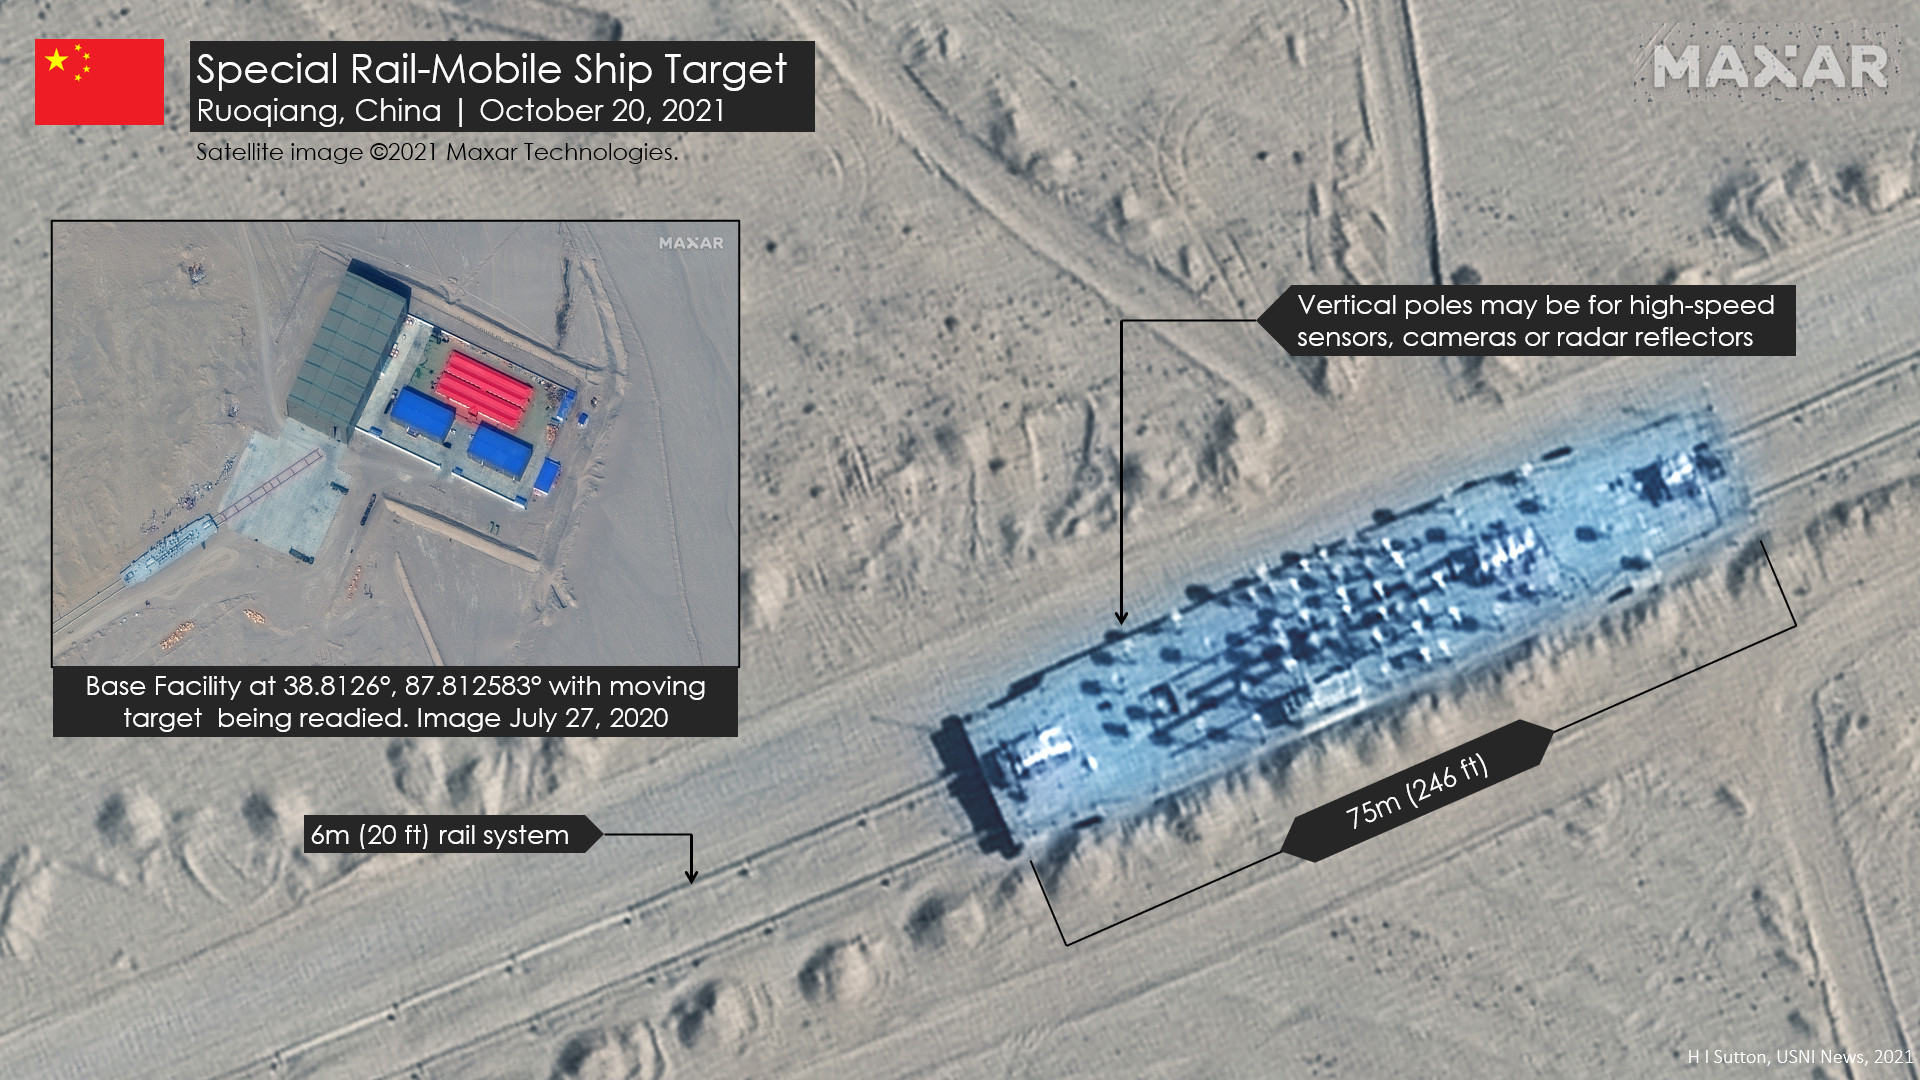 Detailed Photos of the mobile target at the Ruoqiang facility